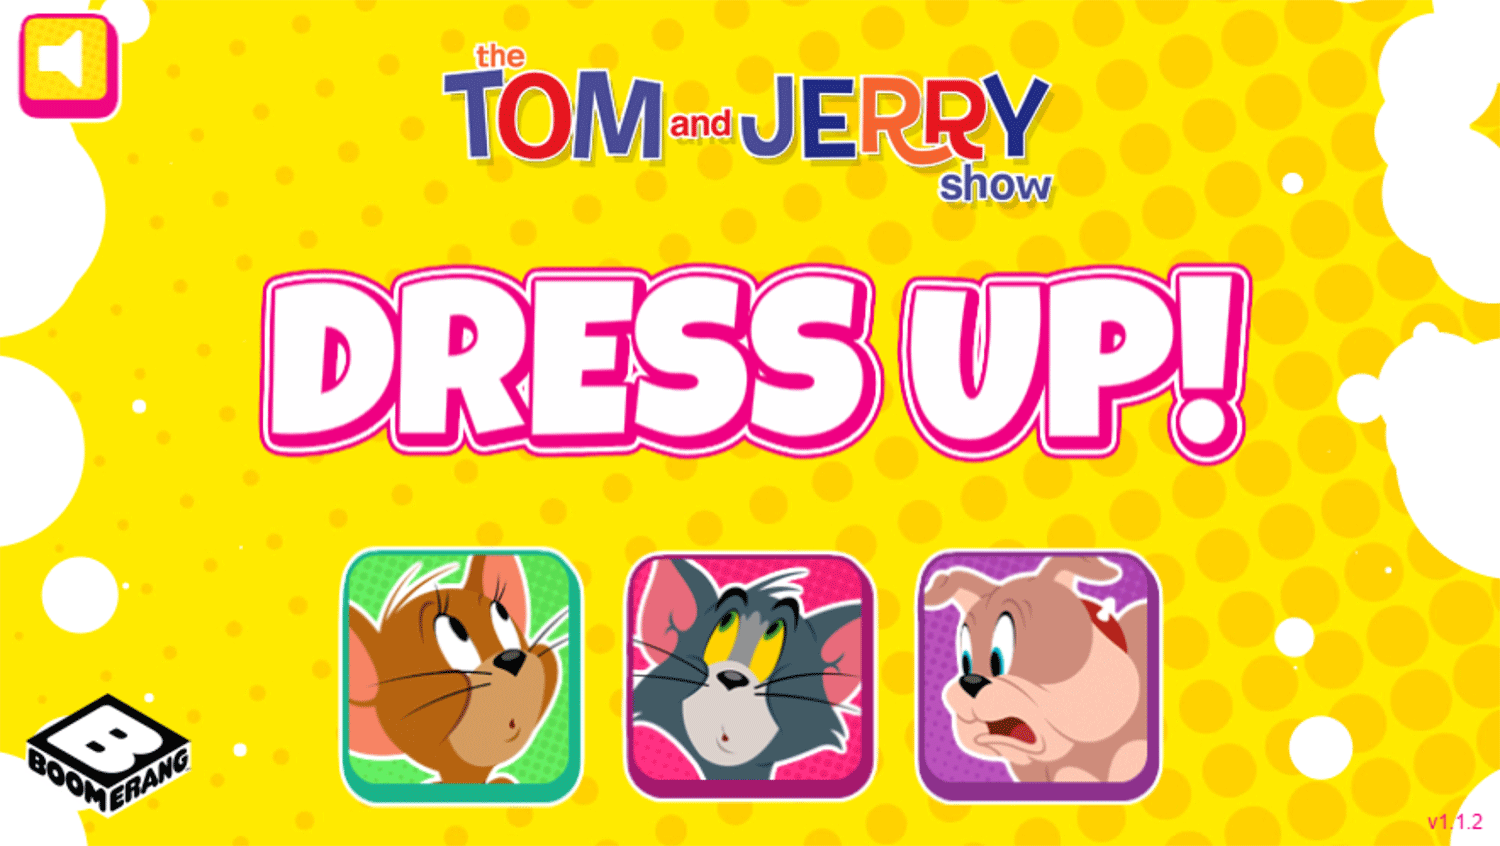 Tom and Jerry Dress Up Welcome Screen Screenshot.